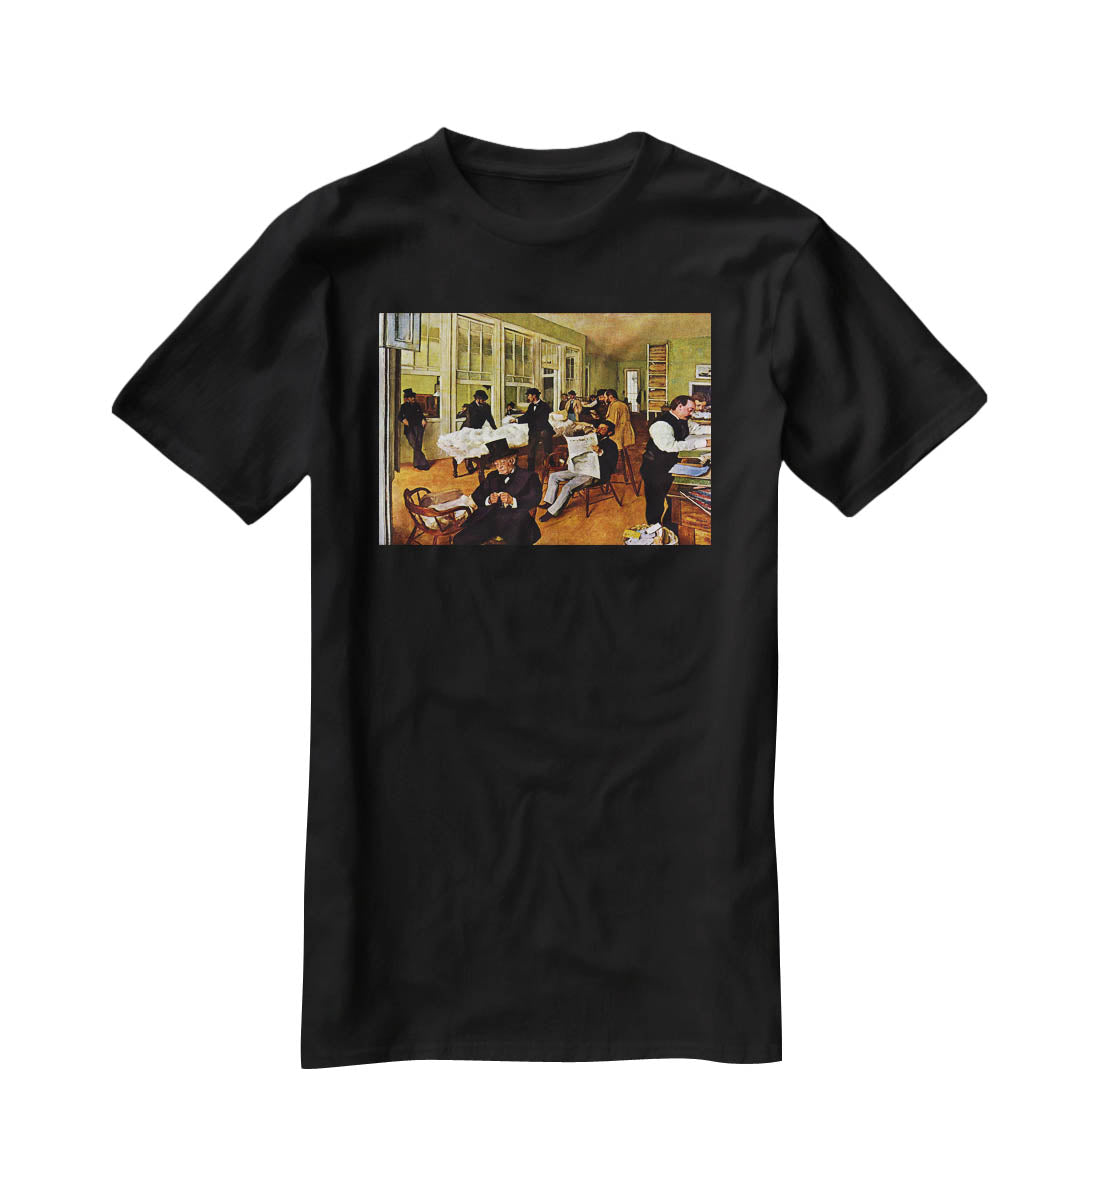 The cotton office in New Orleans by Degas T-Shirt - Canvas Art Rocks - 1